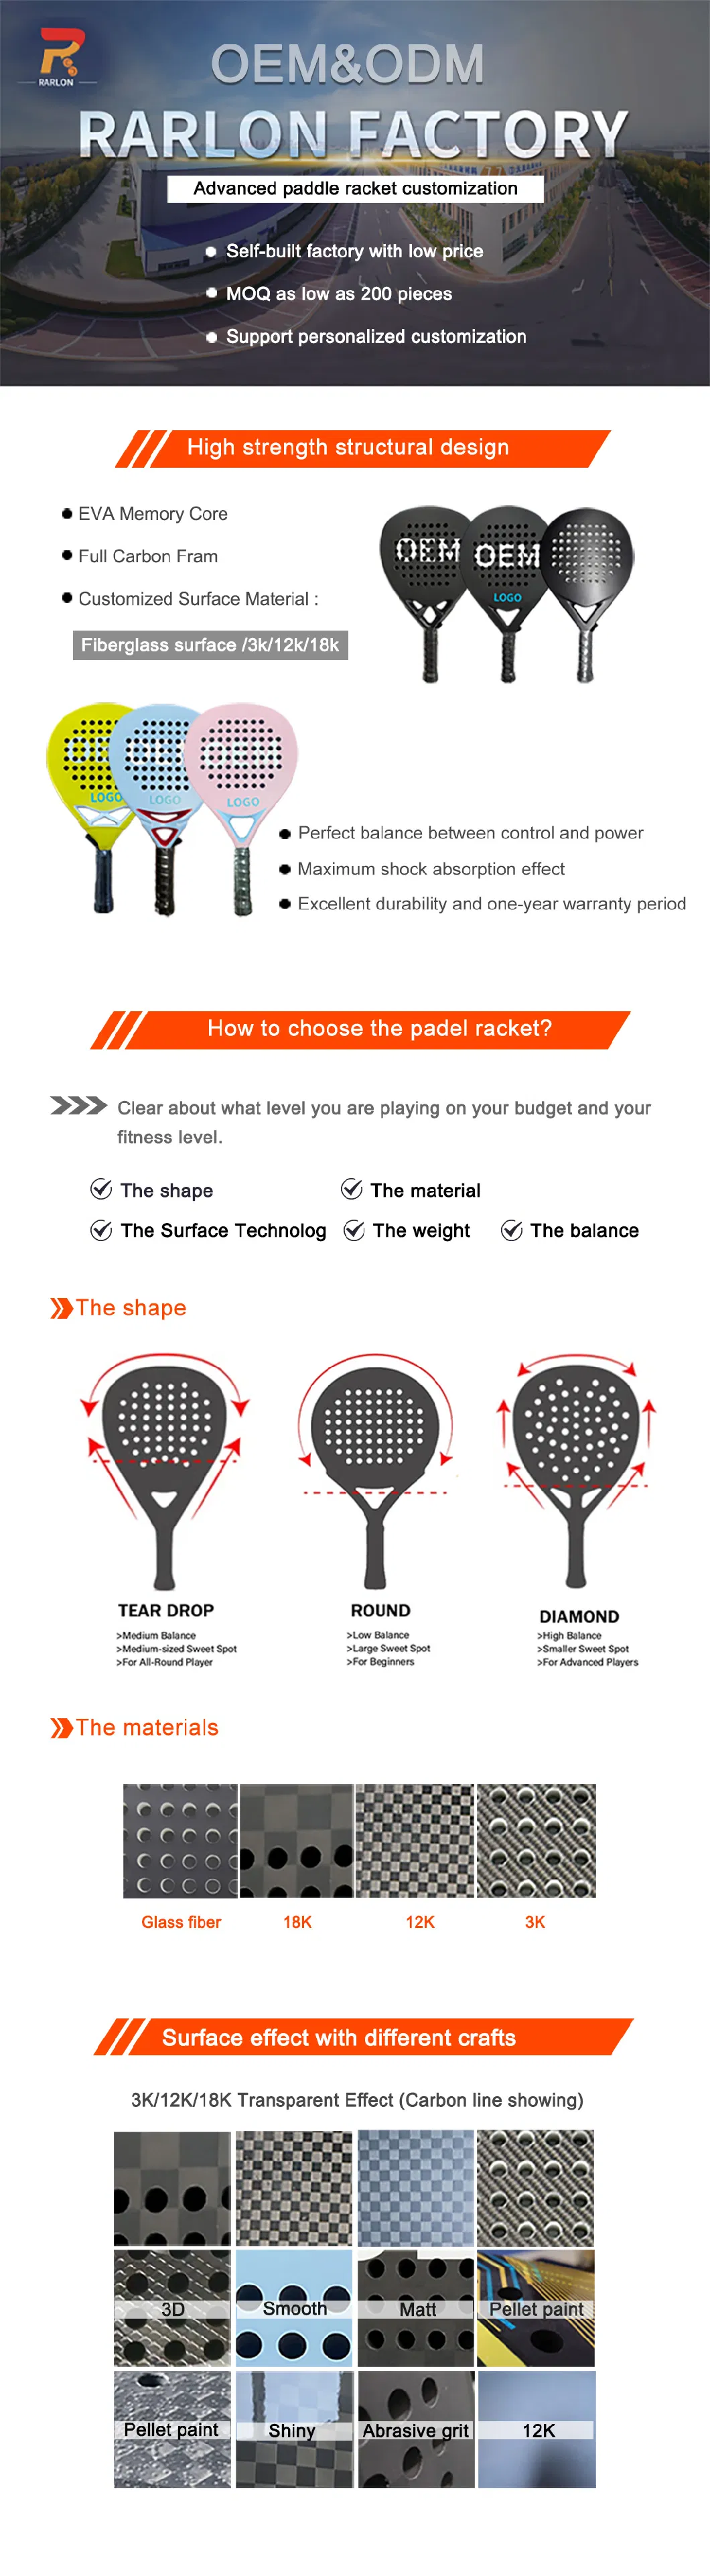 Professional Lightweight Honeycomb Graphite Carbon Pickleball Paddle Racket Set of 2 Pickleball Paddle 4 Pickle Ball